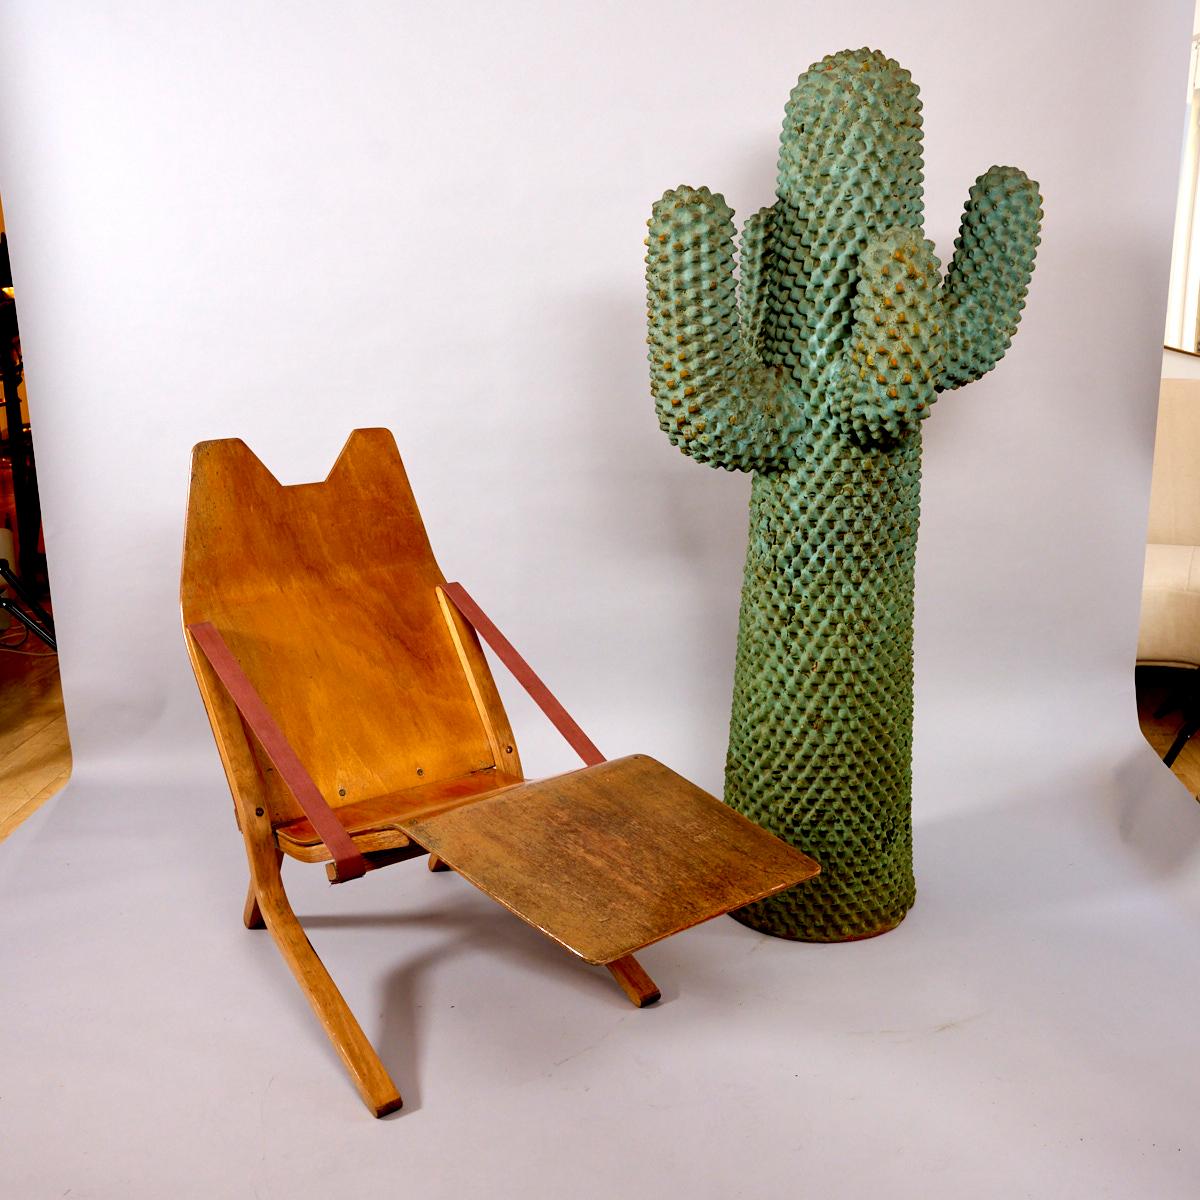 Post-Modern 1st Edition Cactus Coat Rack by Guido Drocco & Franco Mello for Gufram, 1960s For Sale